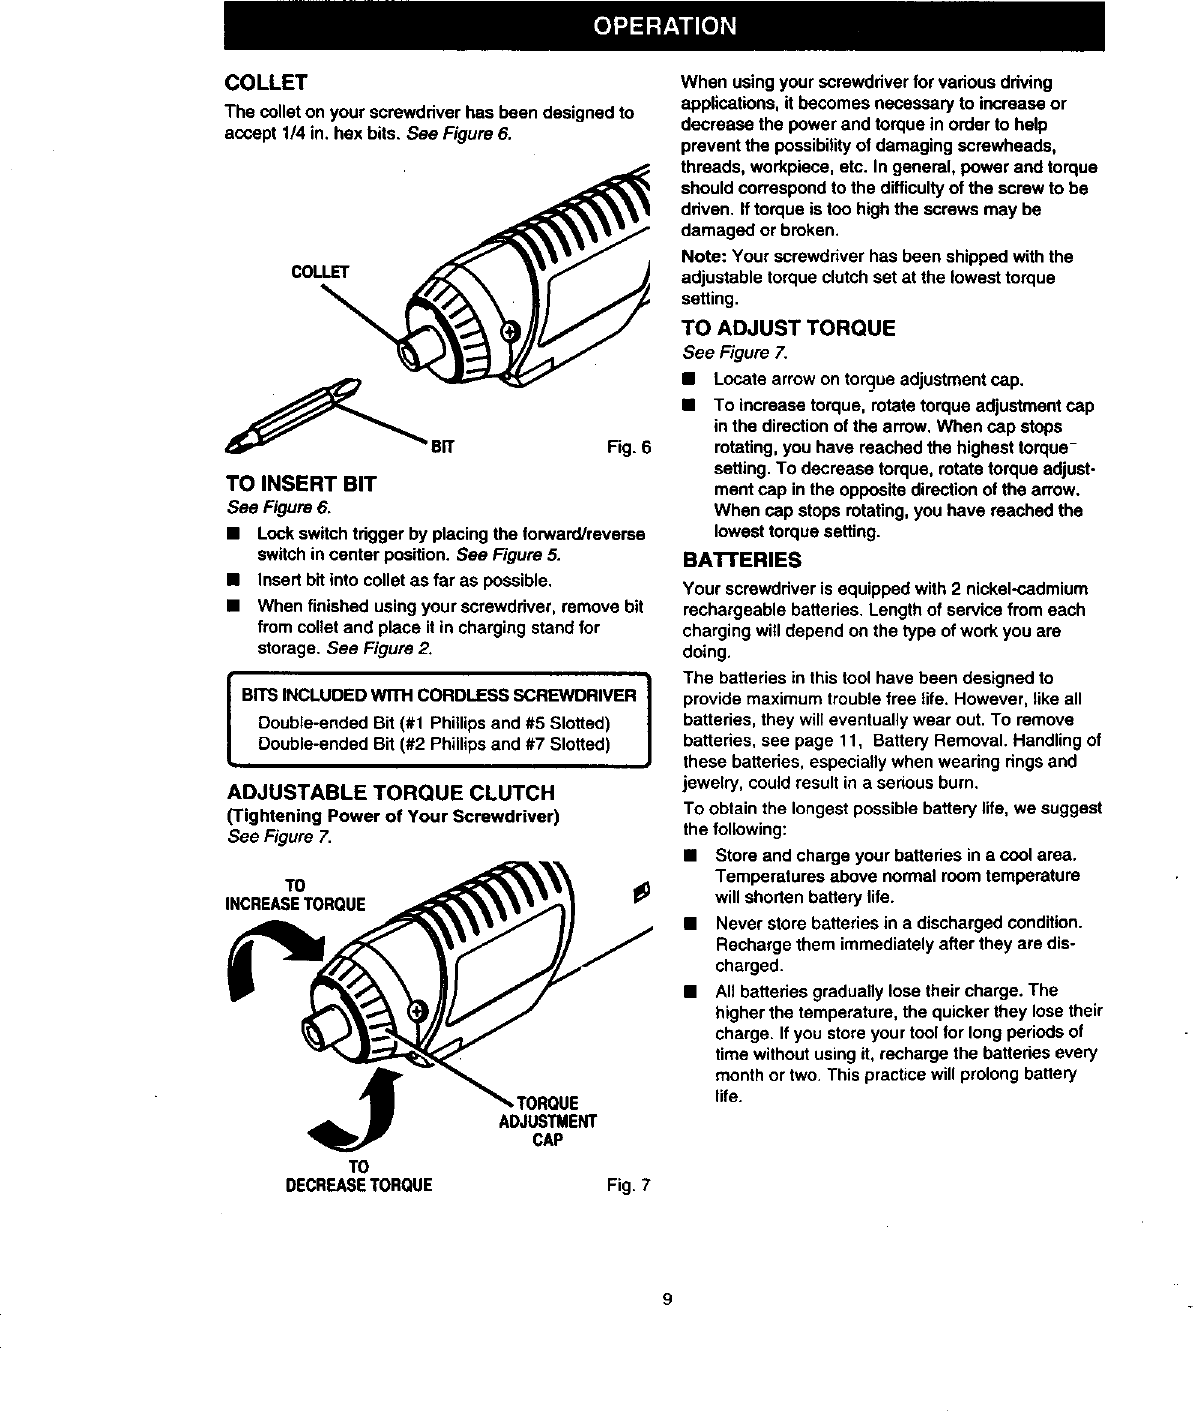 Page 9 of 12 - Craftsman 315111810 User Manual  SINGLE SPEED REVERSIBLE CORDLESS SCREWDRIVER - Manuals And Guides 98100166